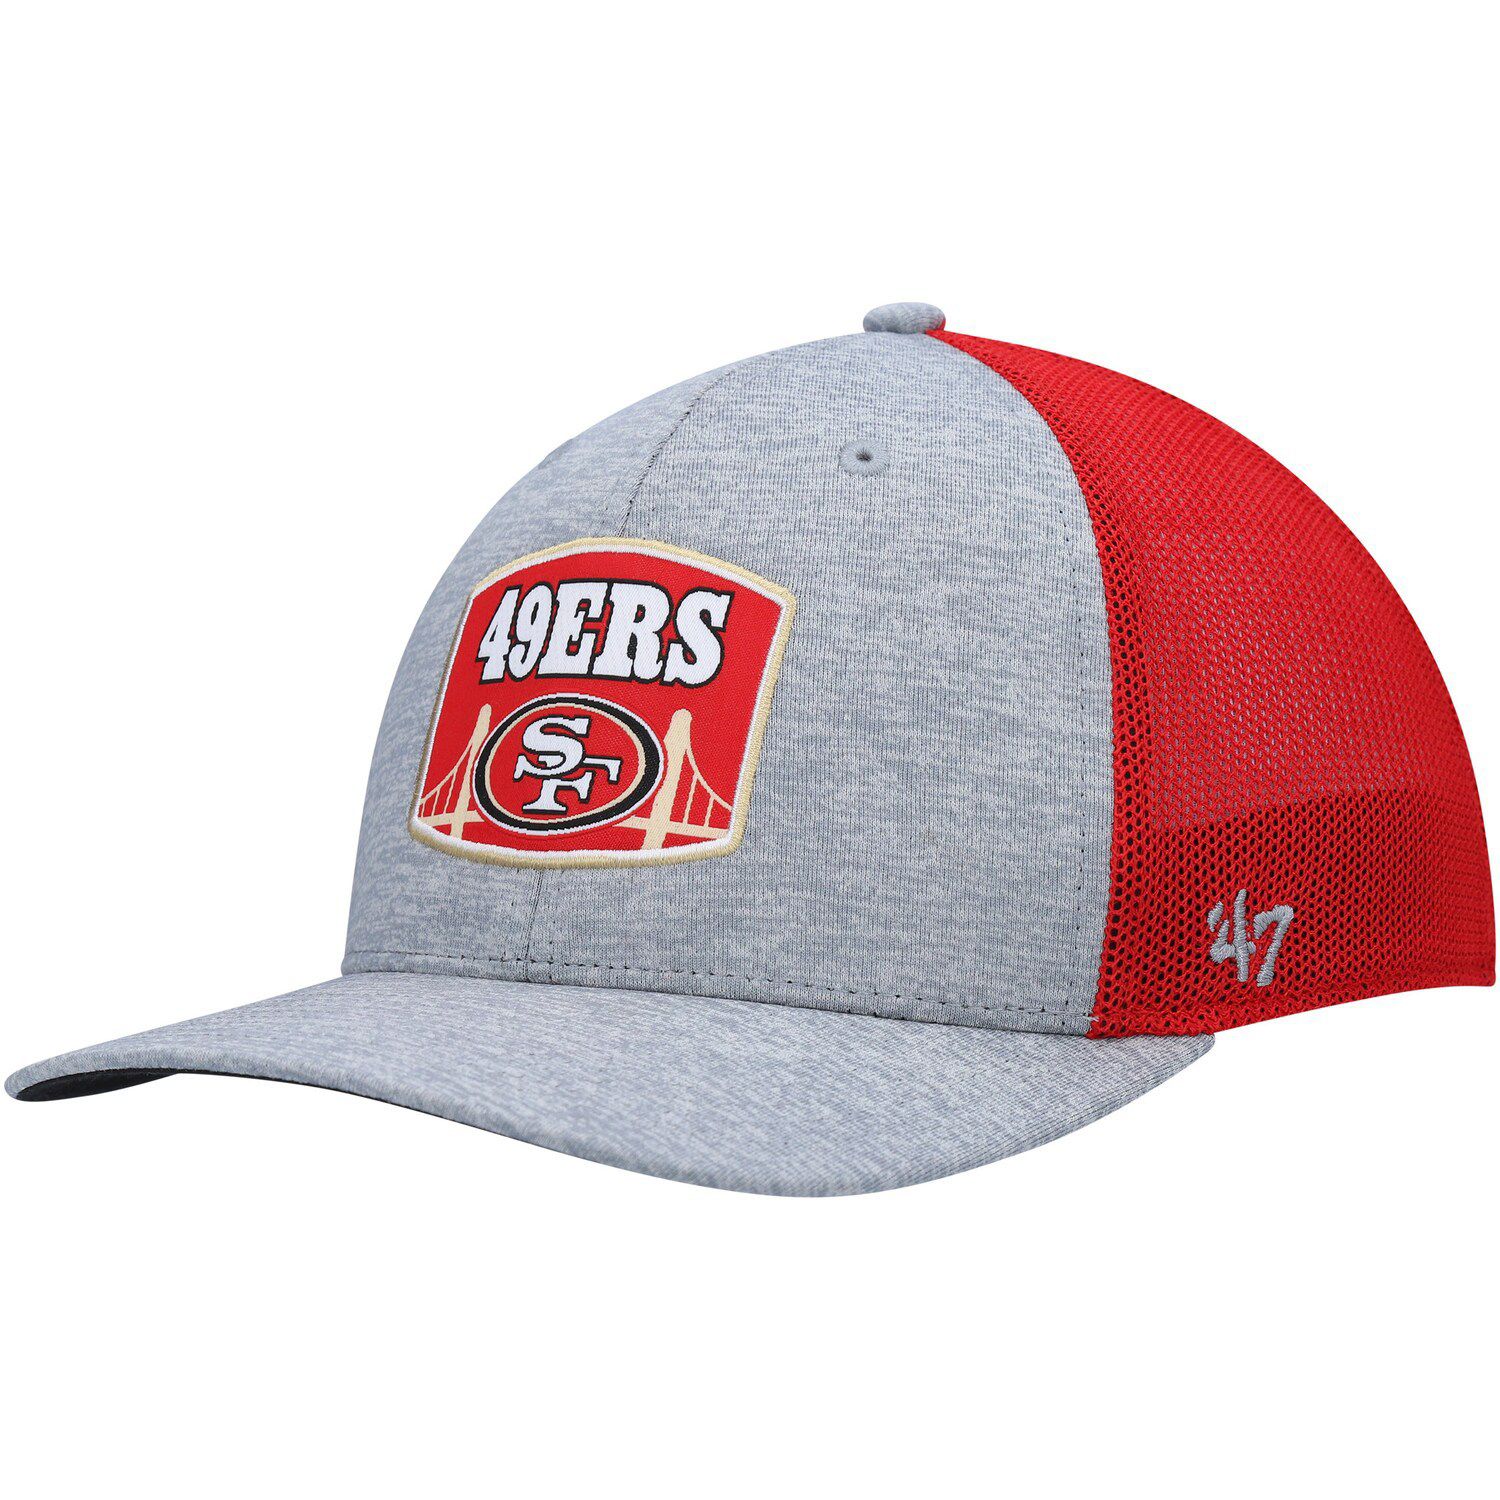 Men's San Francisco 49ers New Era Pink 60 Seasons The Pastels 59FIFTY Fitted  Hat